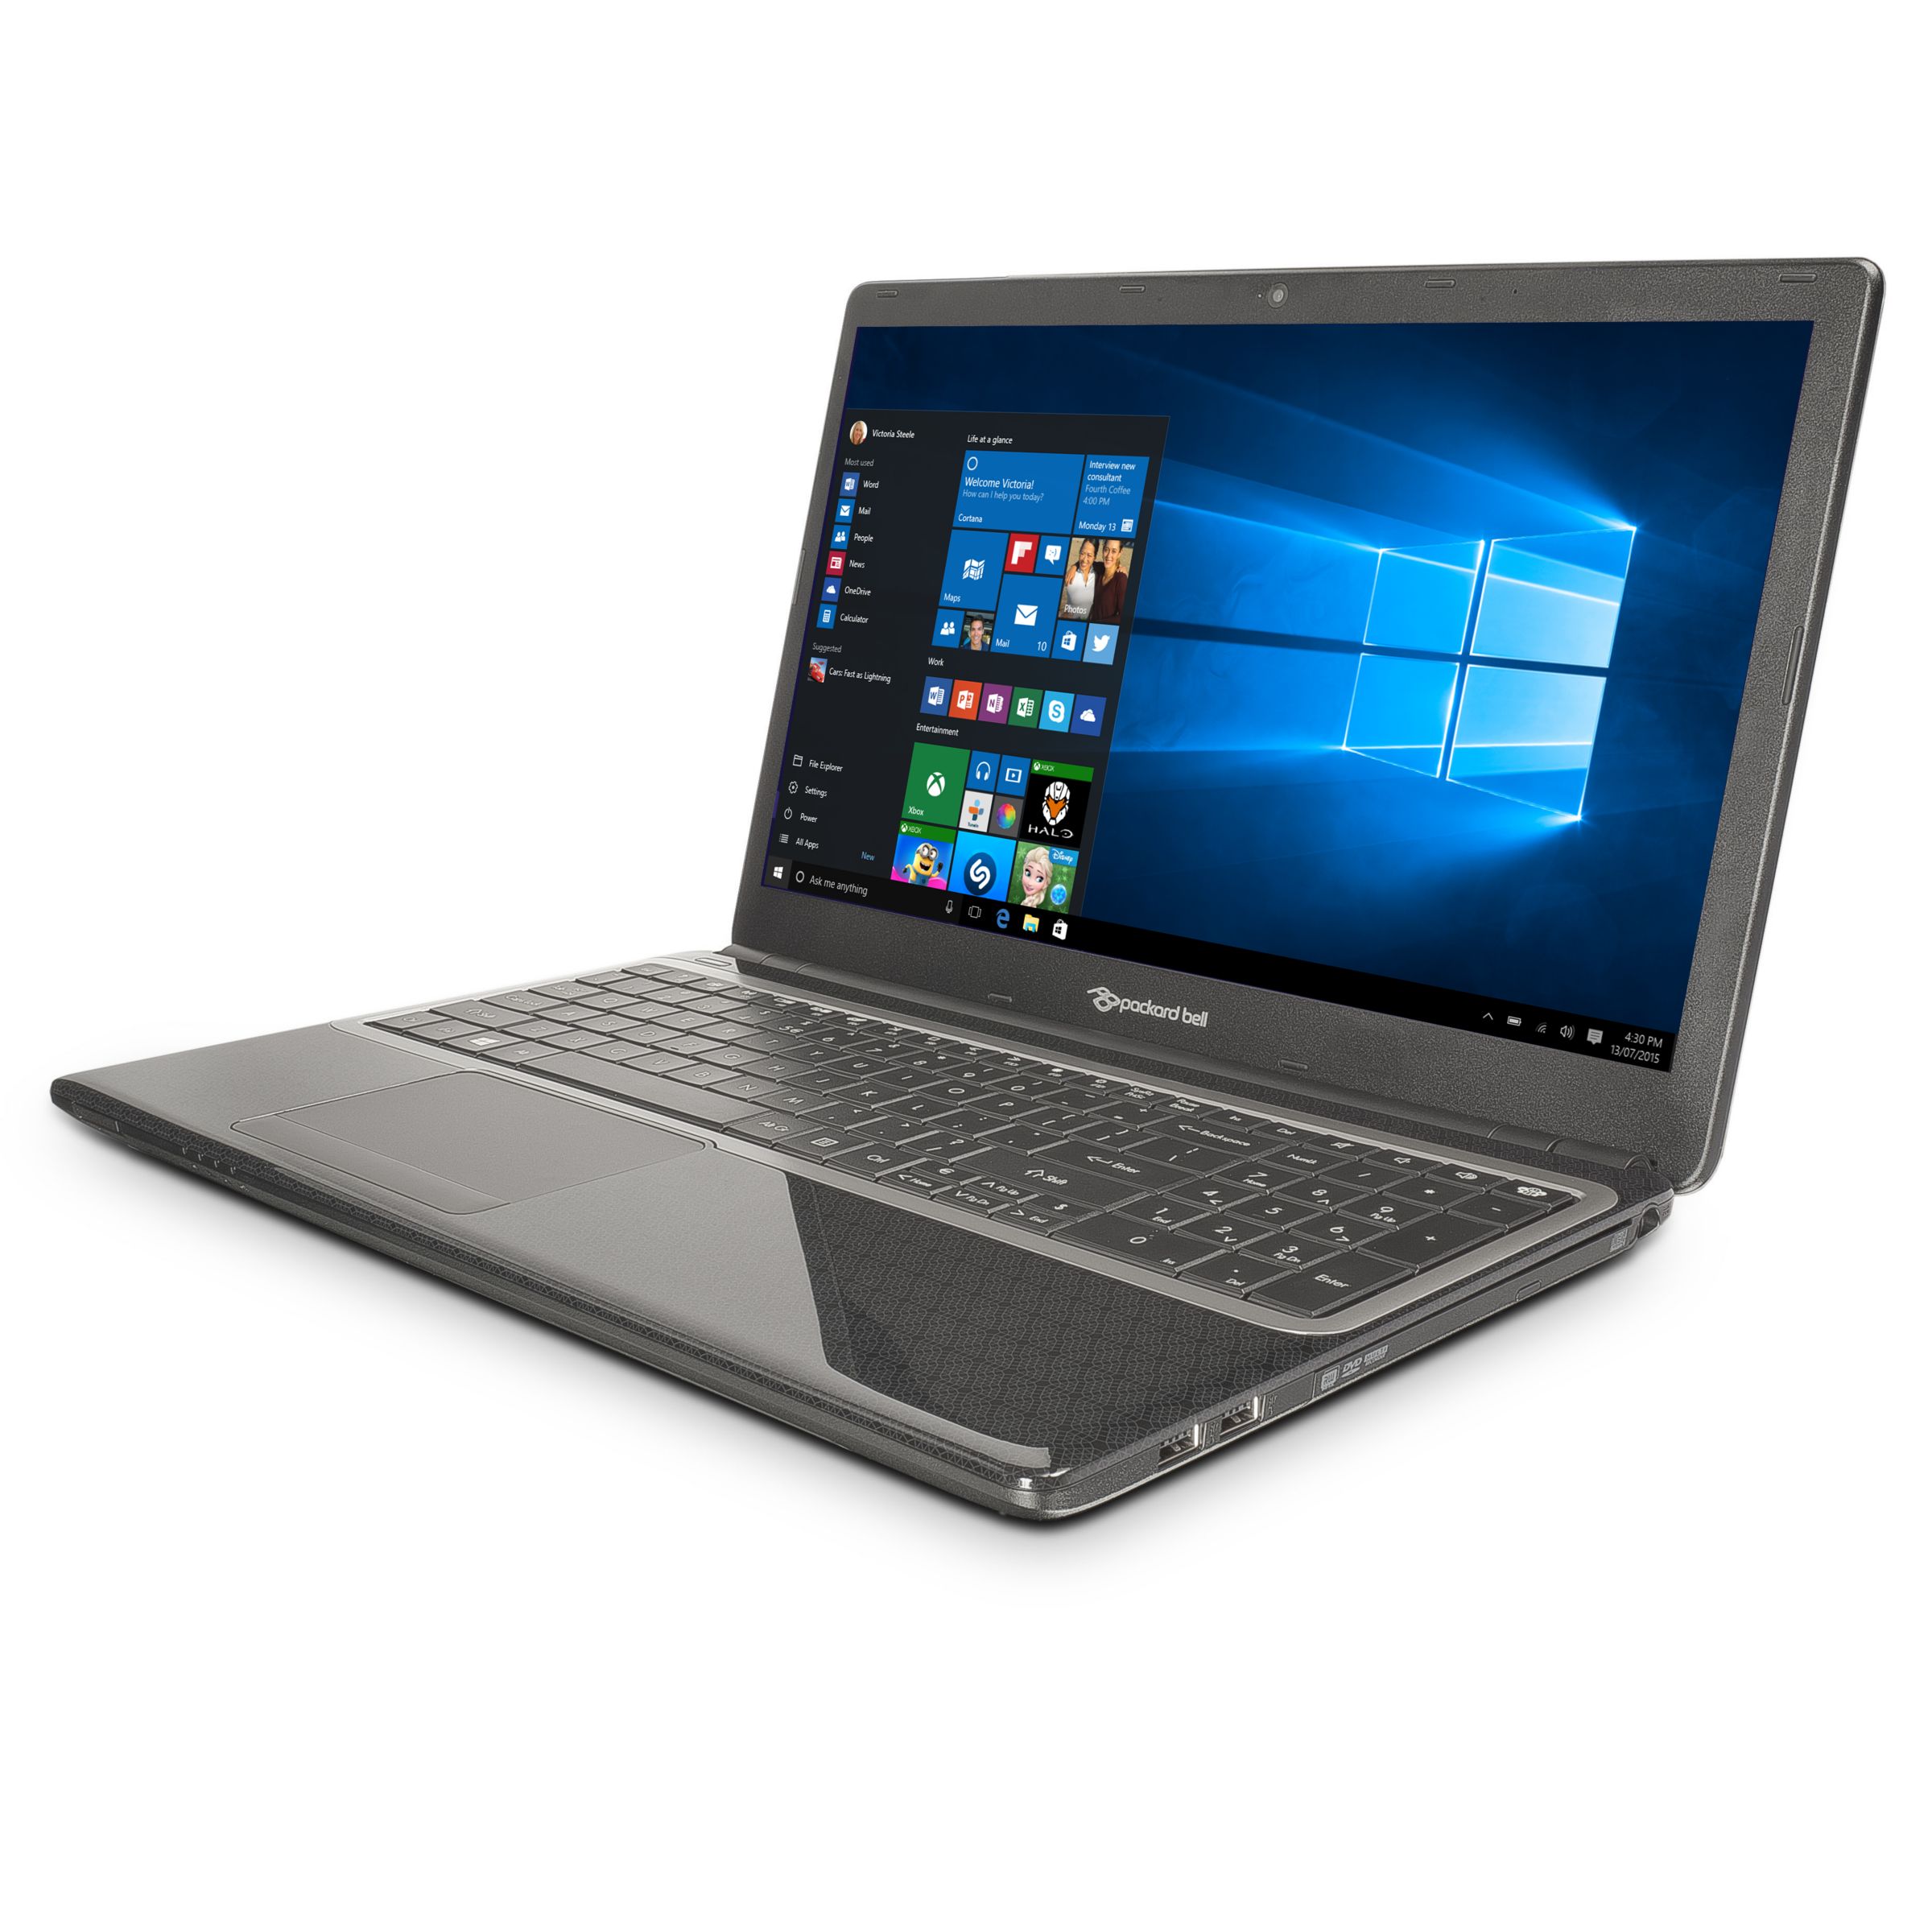 Hammer Isolere At understrege Packard Bell EasyNote TE69 Laptop, Intel Core i3, 4GB RAM, 1TB, 15.6"